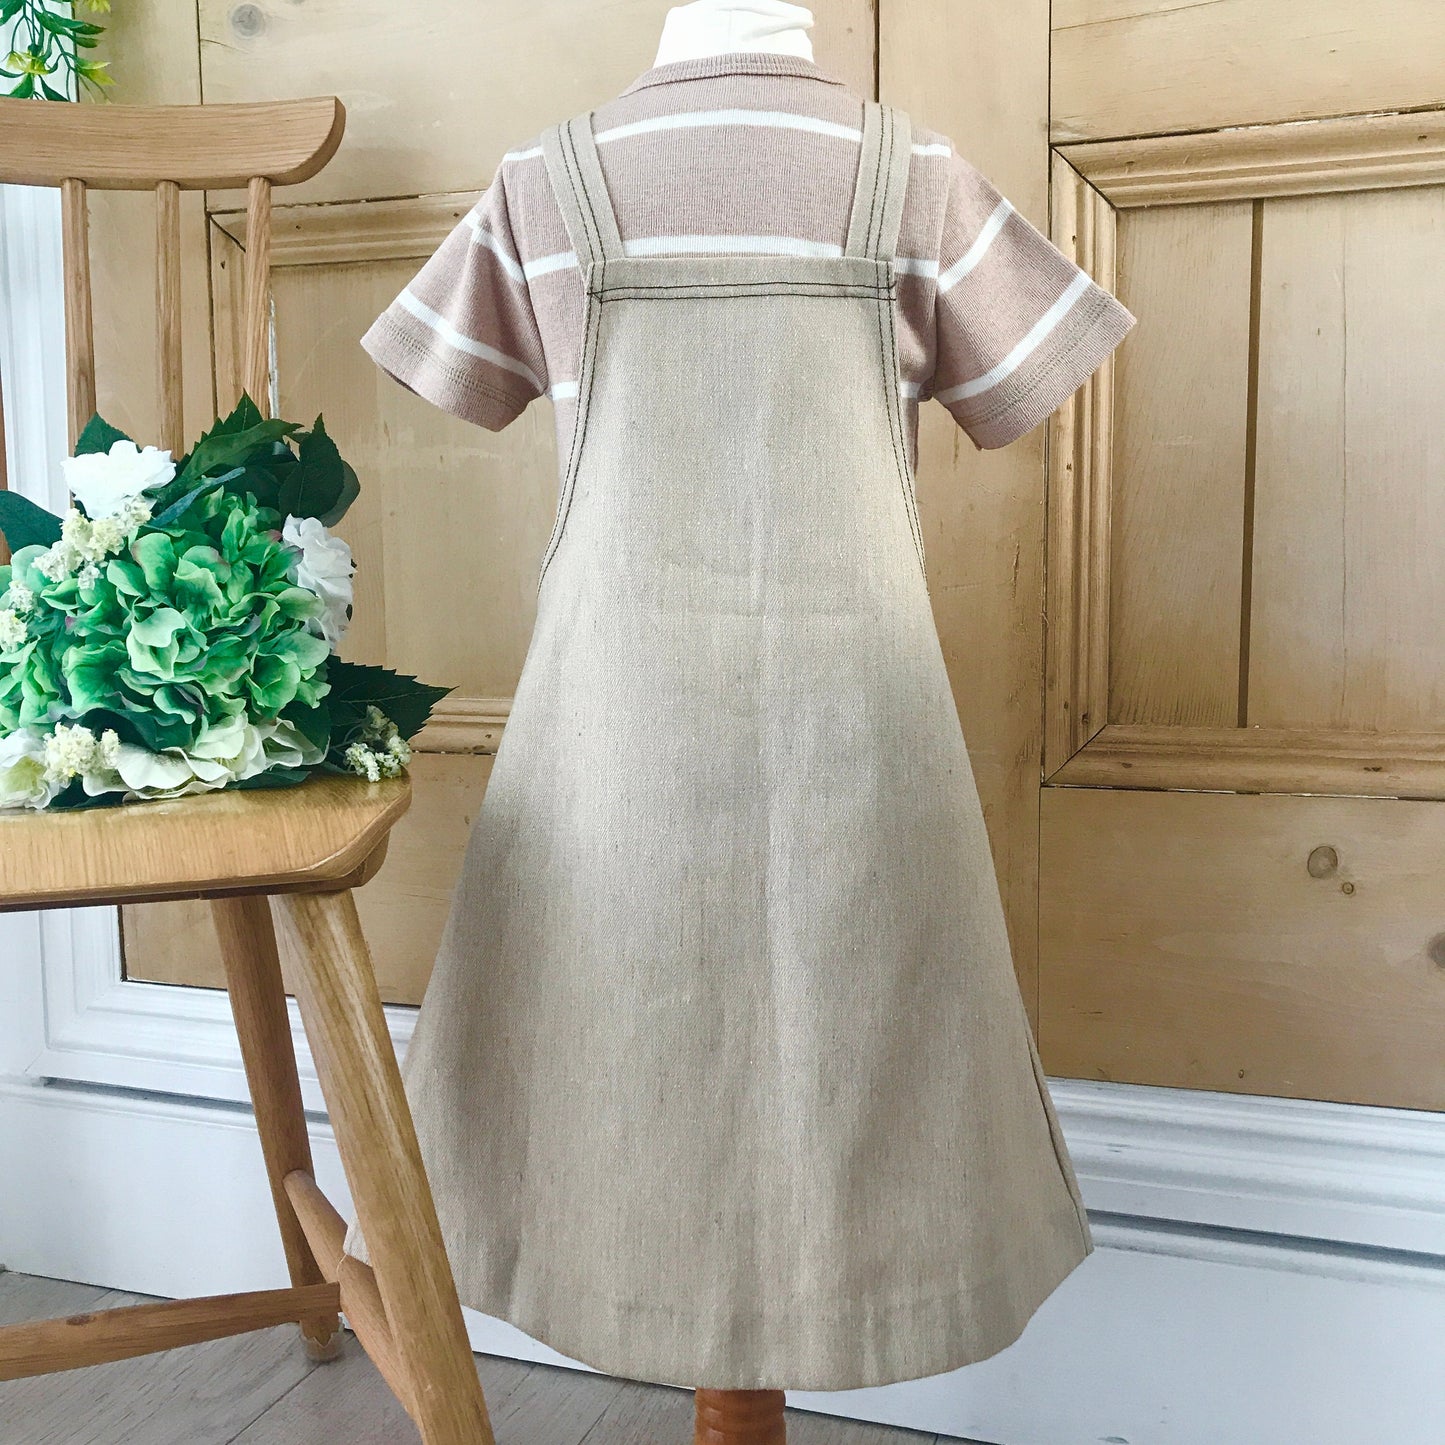 Deadstock Vintage 1970s Beige Pinafore Girl's " Two" Dress Spanish Made 4-5Y